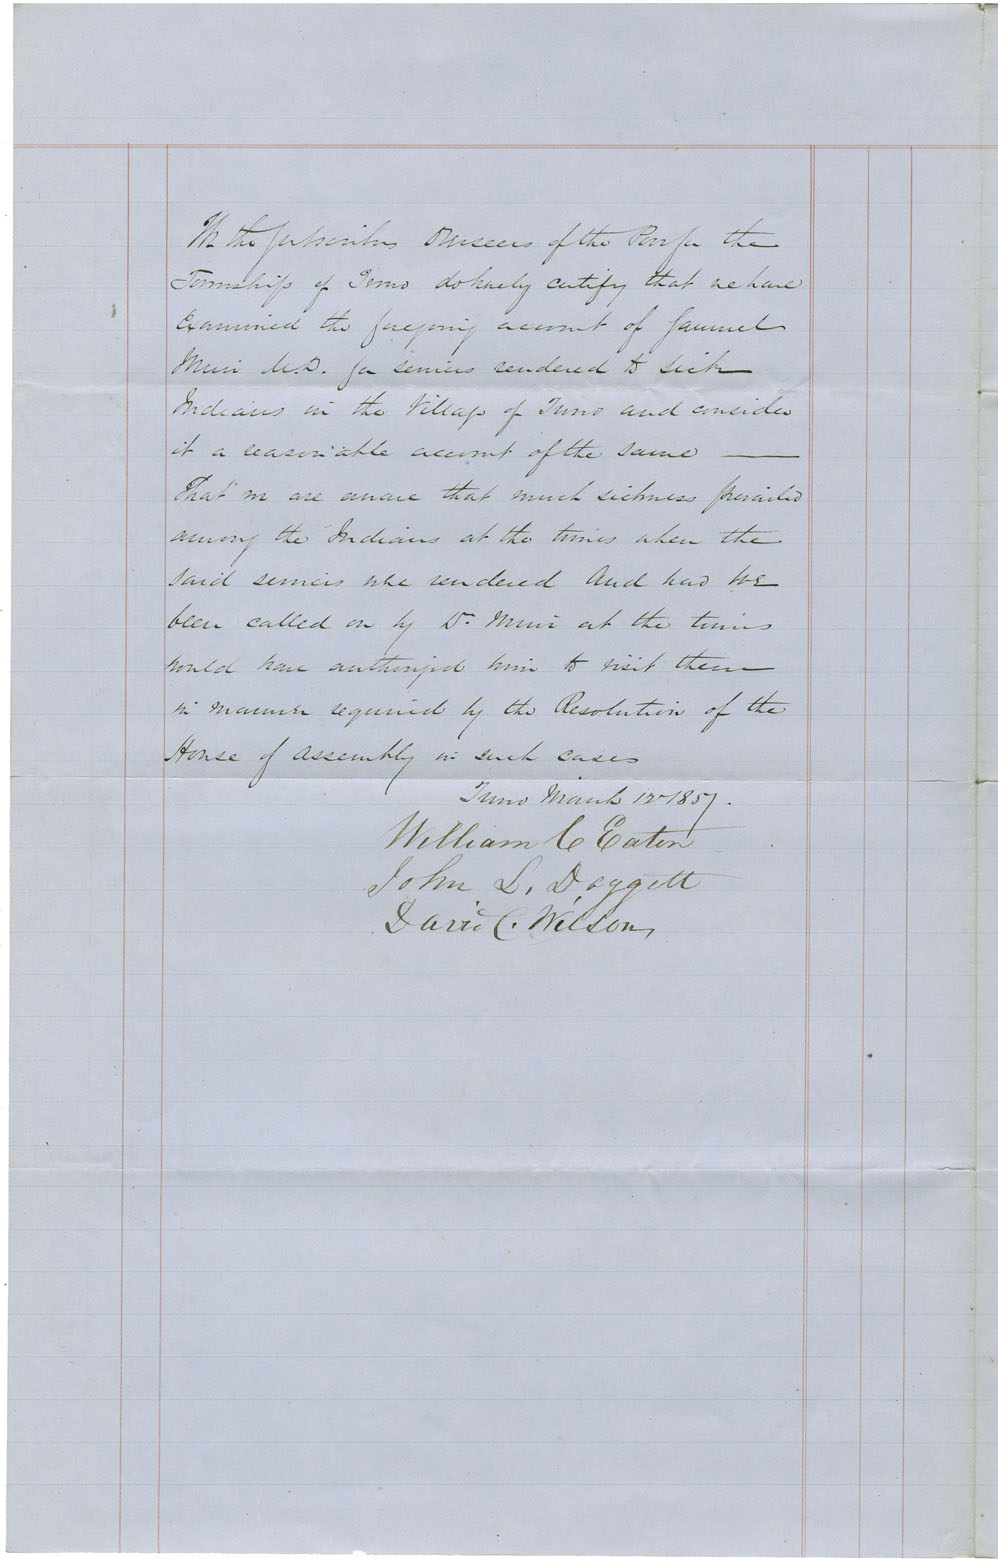 Account of services of Dr. Samuel Morris for sick Mi'kmaq at Truro, and an accompanying letter.